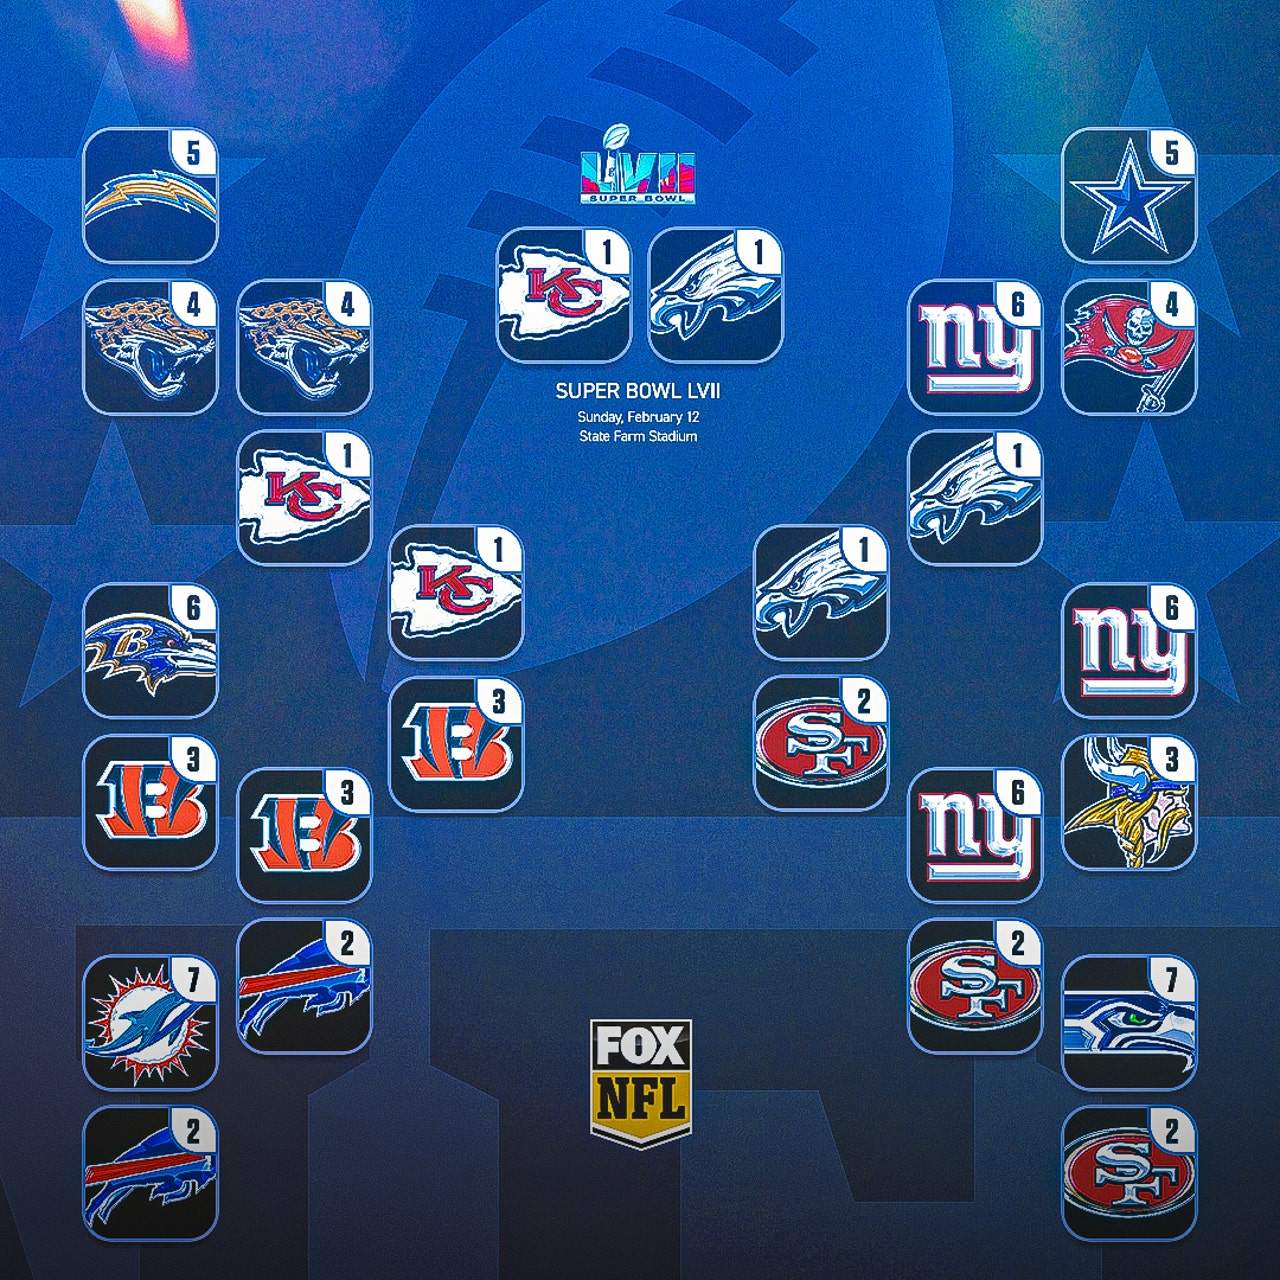 nfl playoff schedule as of today